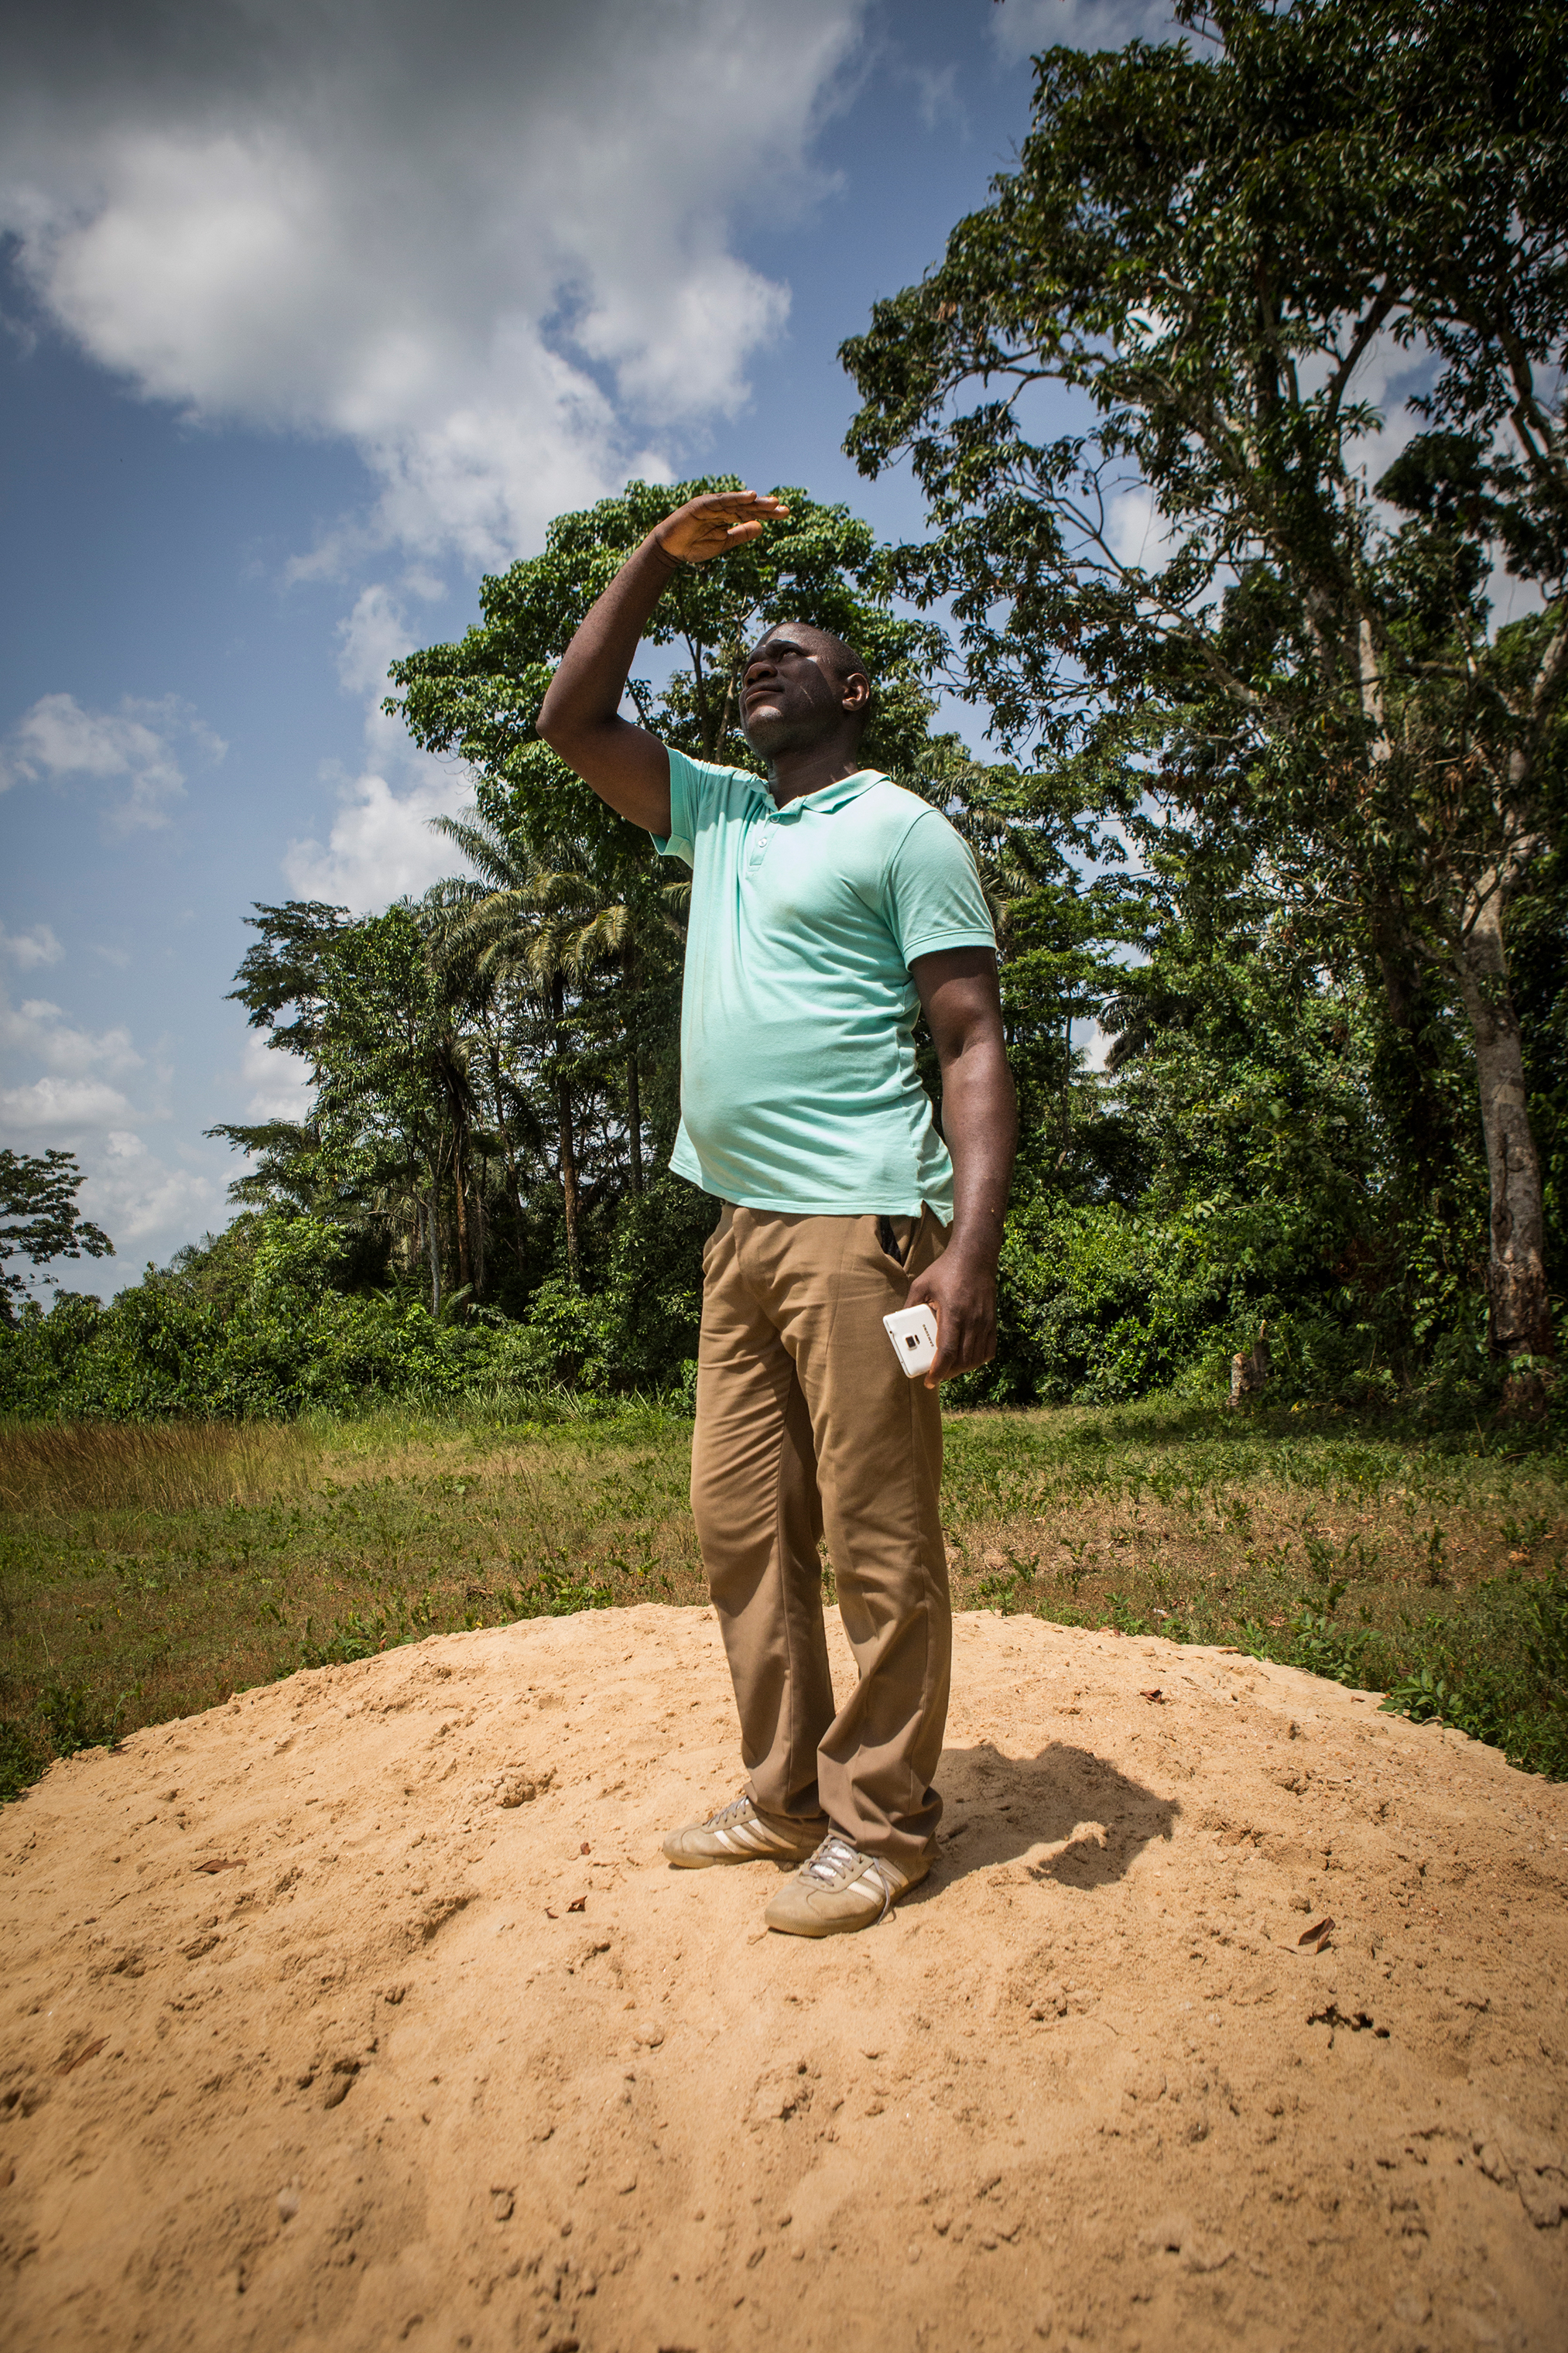 Diamond mining team sponsor Pastor Emmanuel Momoh, who took the diamond to a government representative knowing he would be losing the lion’s share of the diamond’s value, has no regrets. In May, Momoh stands where a new school in Koryardu will be built with money from the diamond’s sale. (Jane Hahn for TIME)